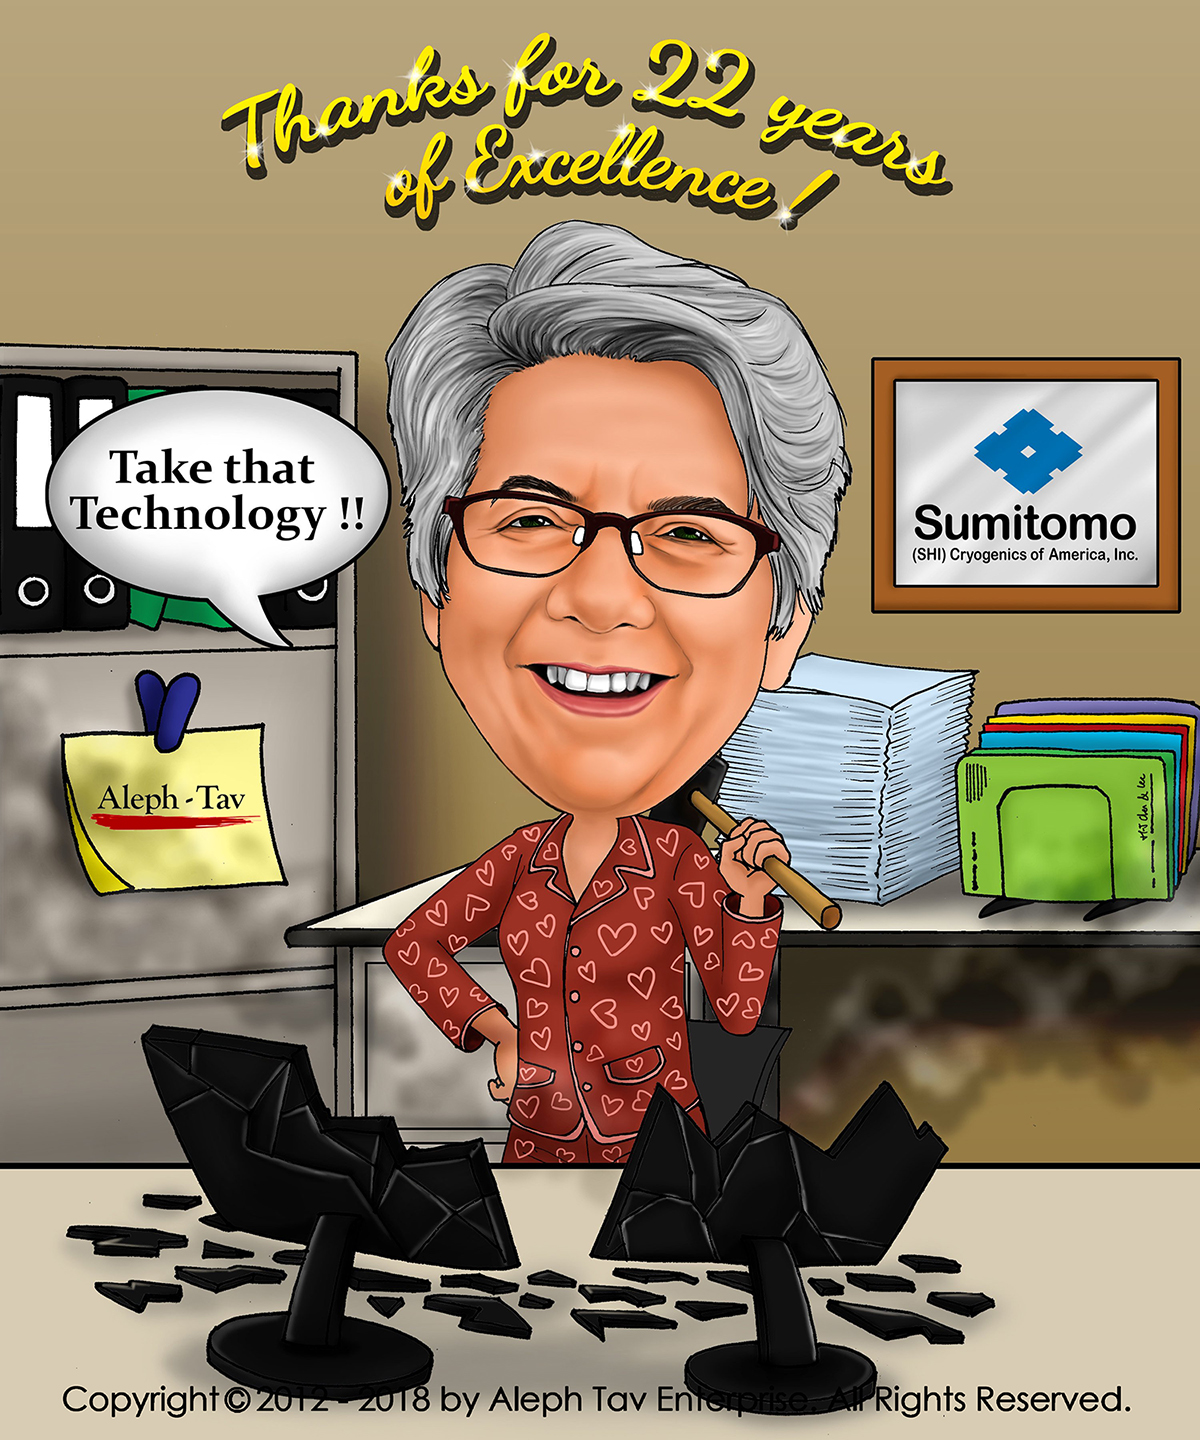 retirement-corporate-gift-for-colleague-coworker-caricature-from-photo.jpg